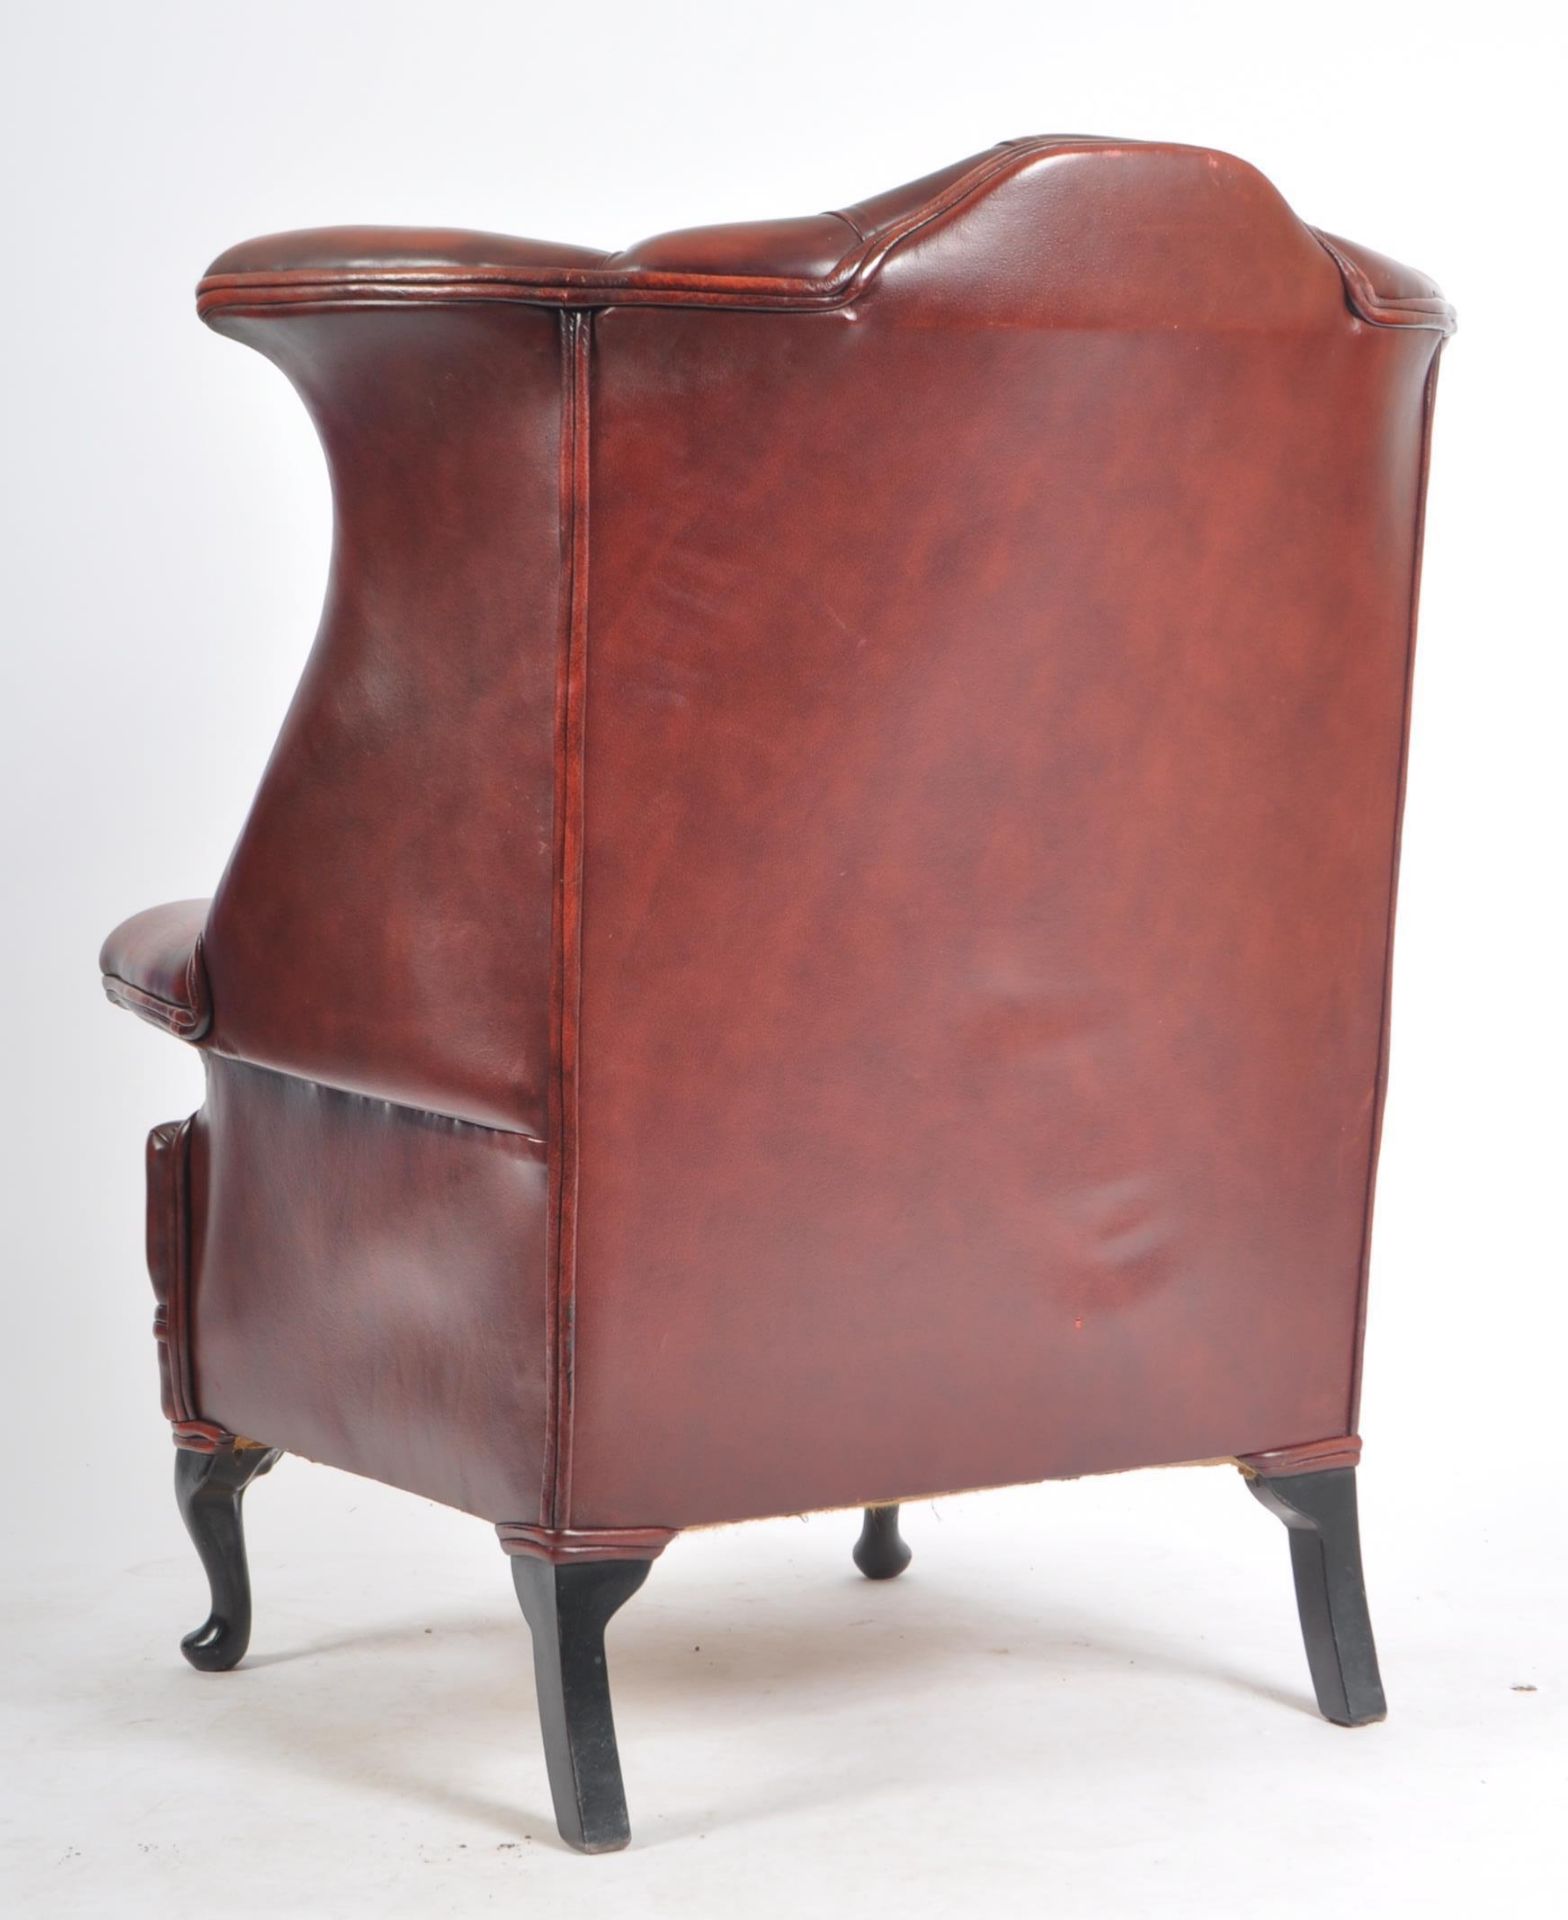 VINTAGE CHESTERFIELD QUEEN ANNE STYLE WINGBACK ARMCHAIR - Image 7 of 7